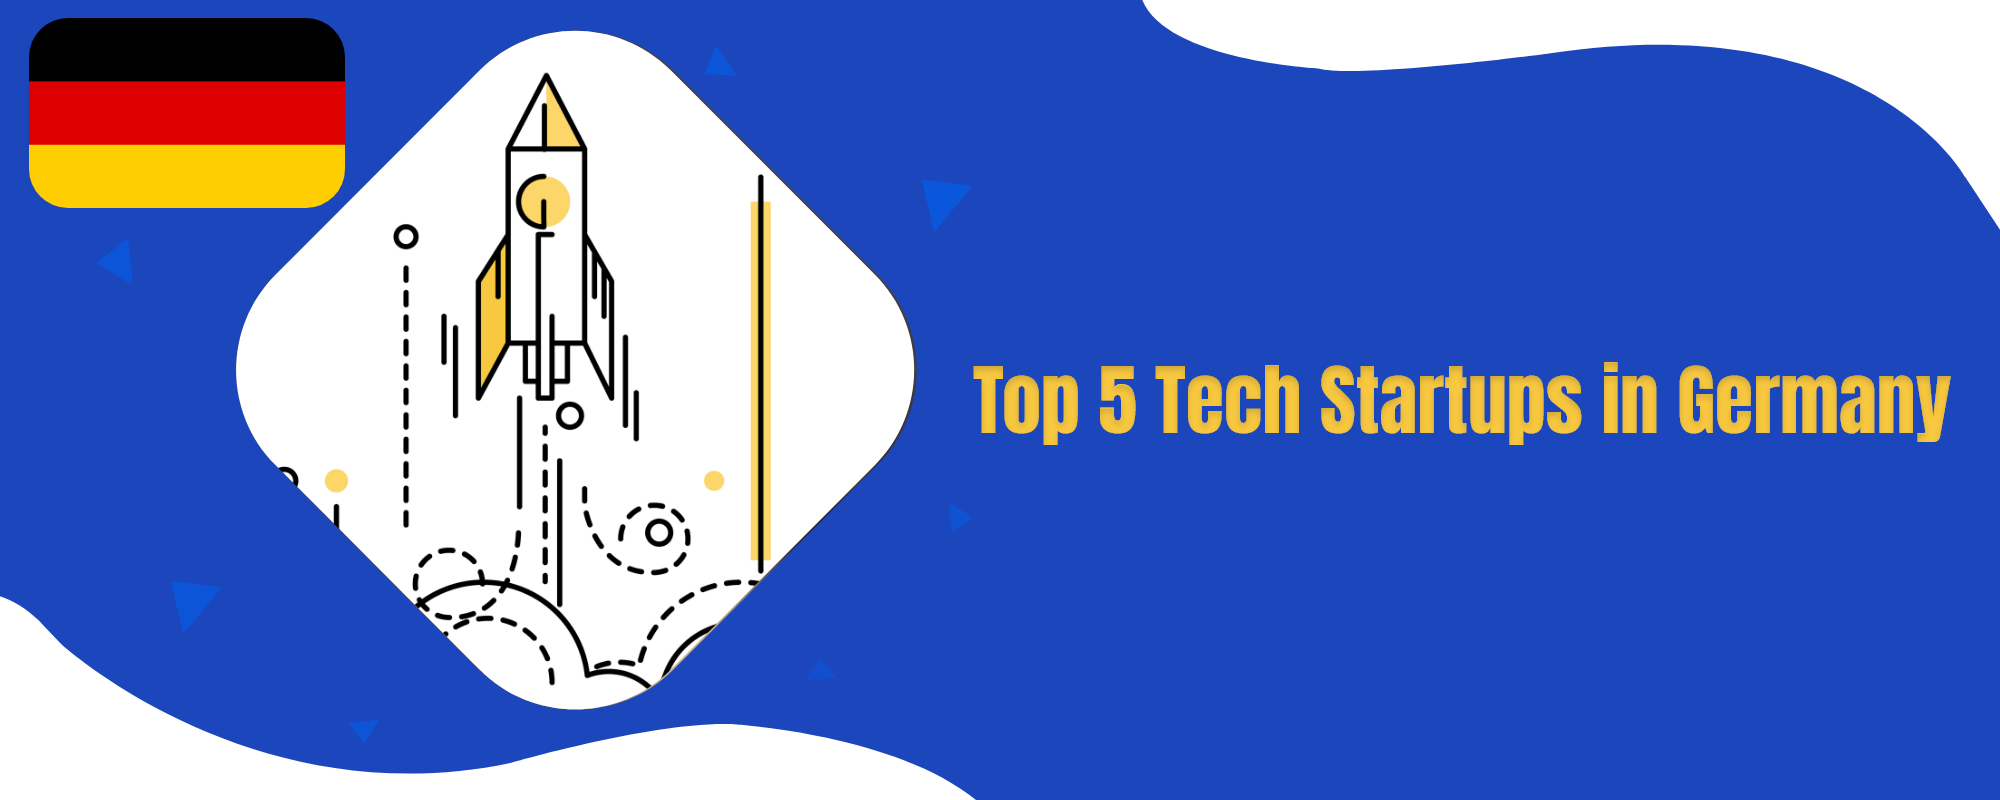 Top 5 Tech Startups In Germany